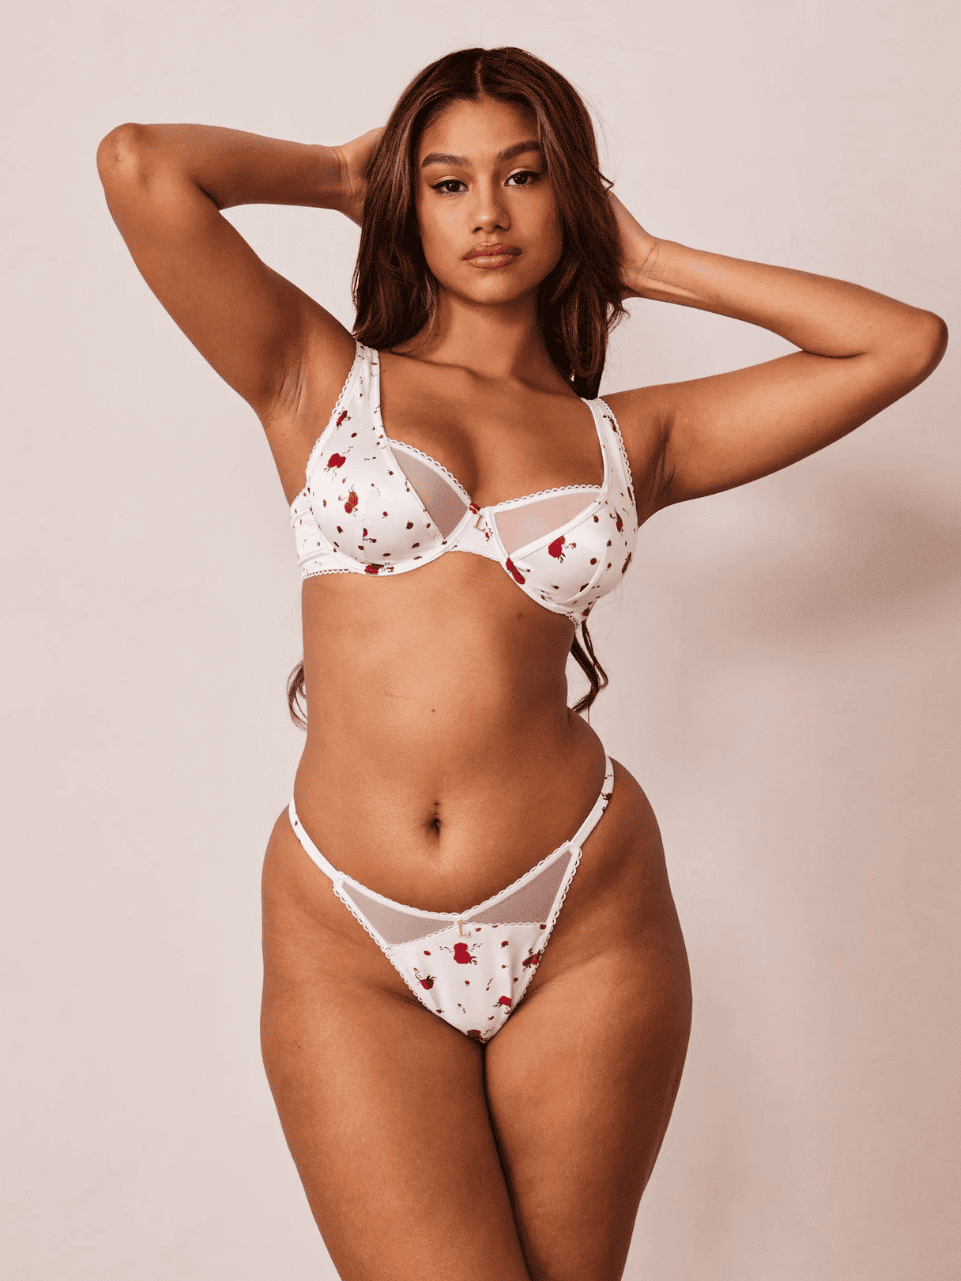 8 Sizzling Lingerie Sets To Instantly Surprise Your Partner on